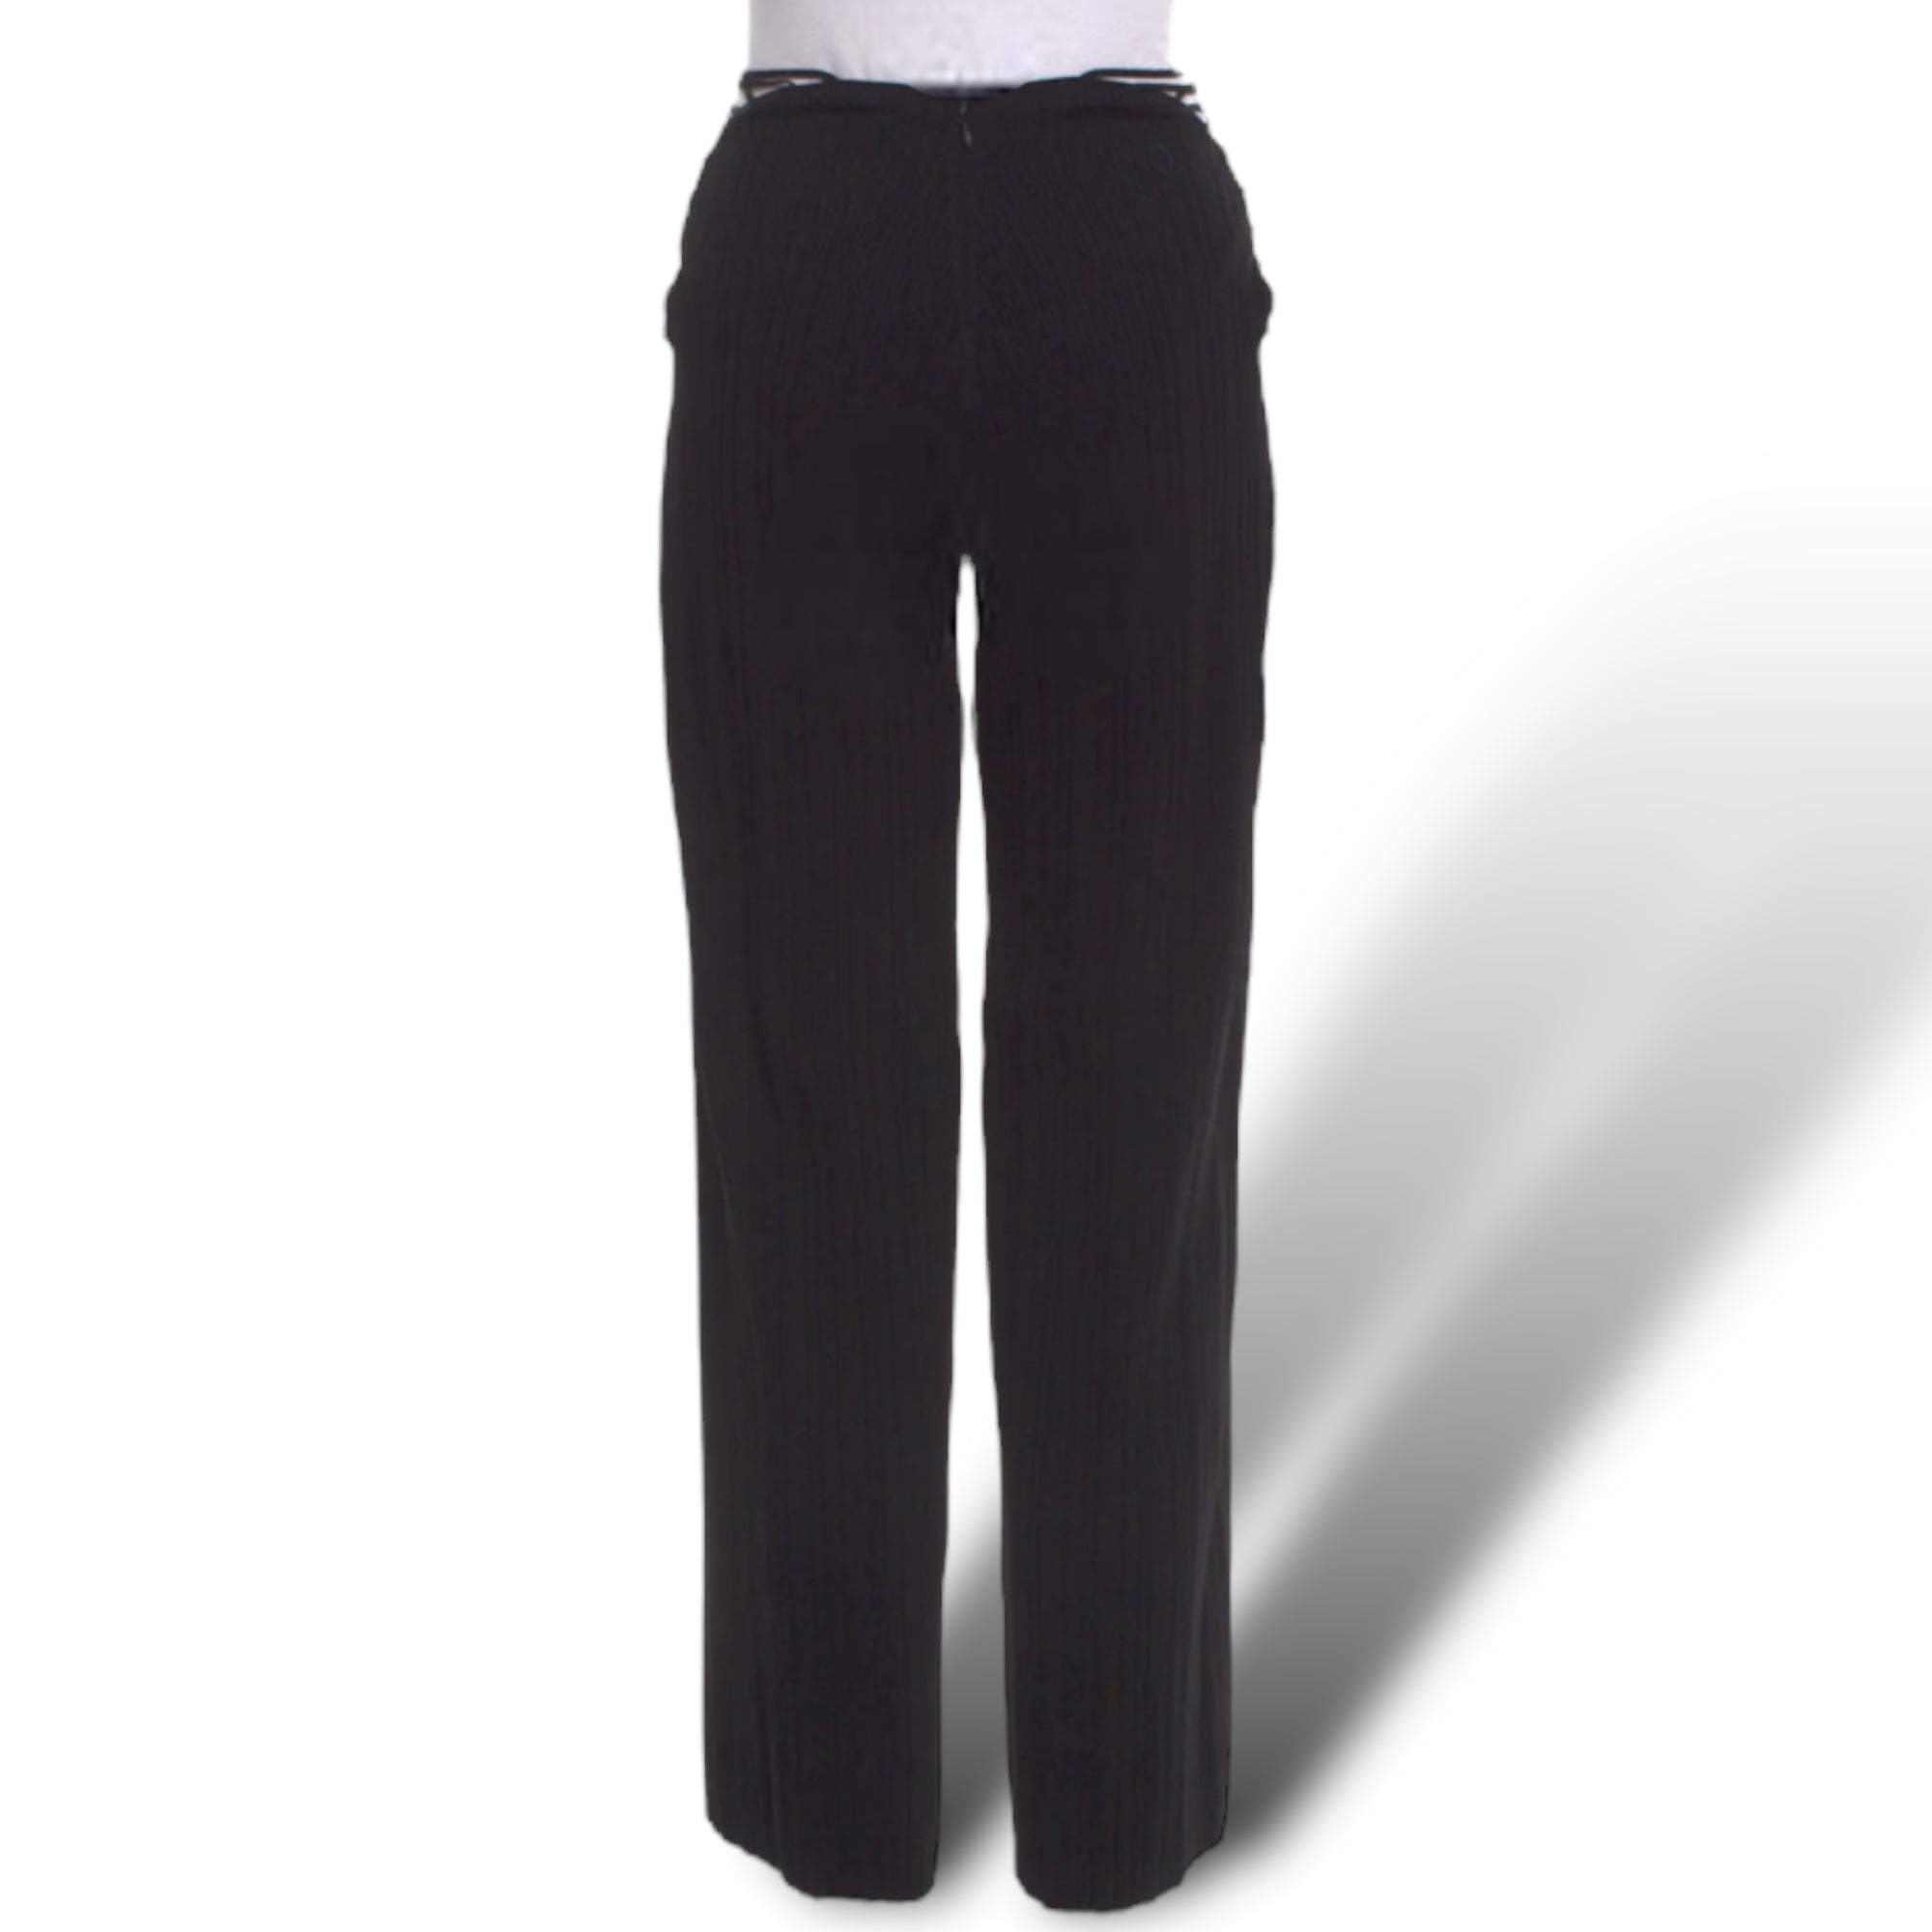 CULT GAIA Wide Leg Pants with Cutout Side Accent |Size: S|